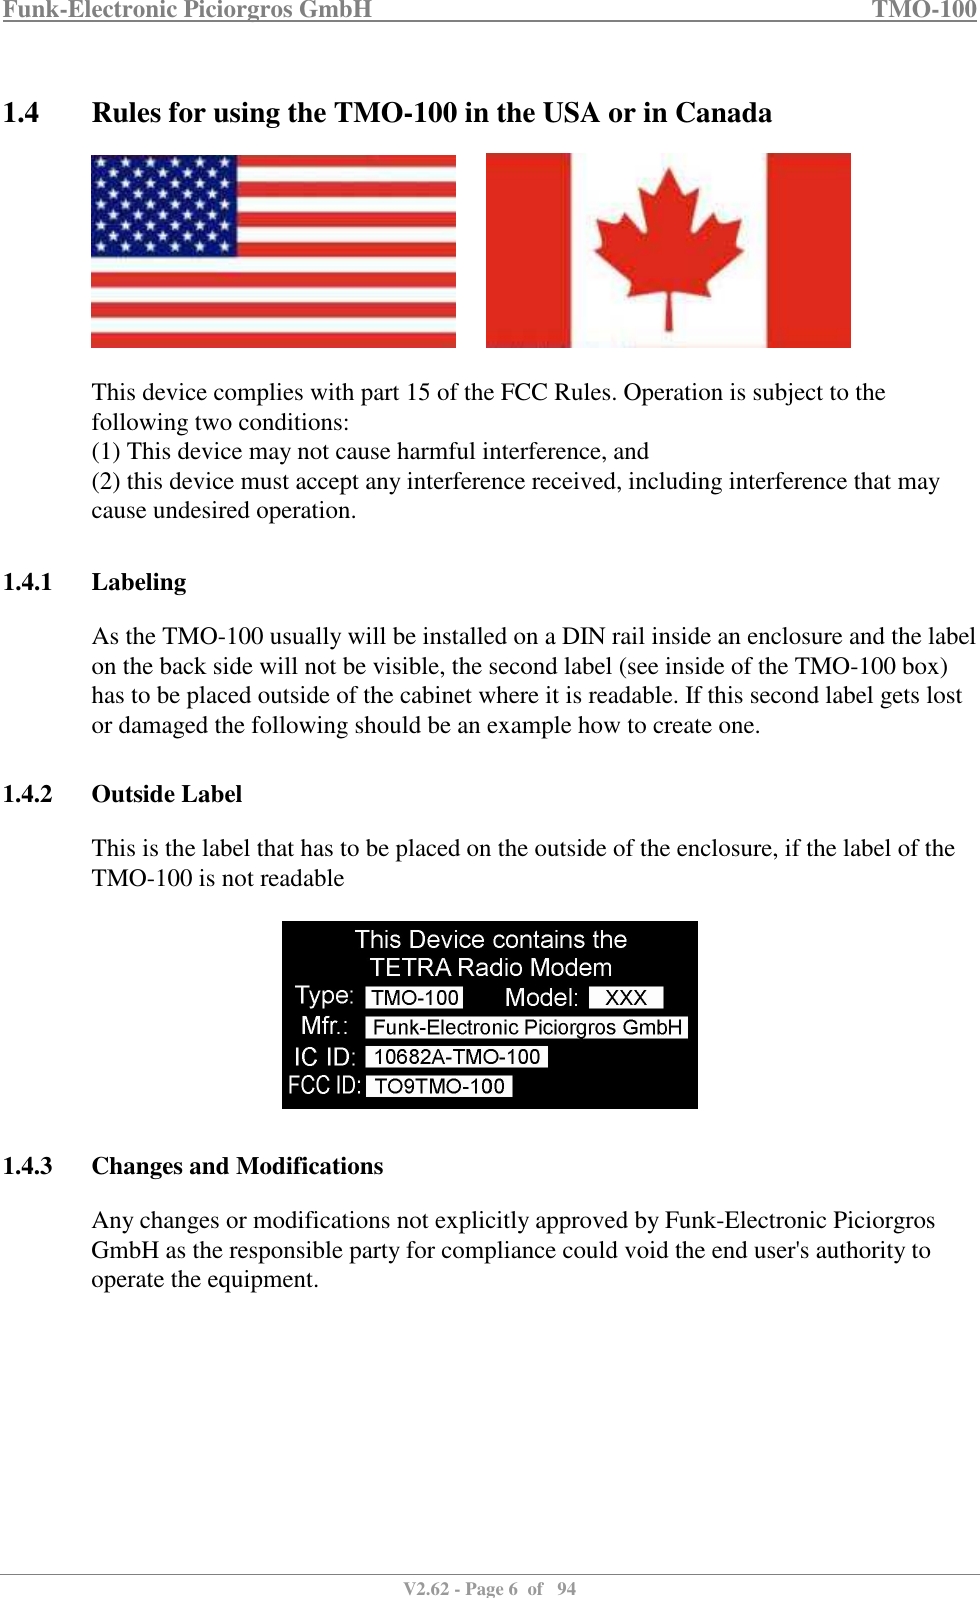 Funk-Electronic Piciorgros GmbH   TMO-100   V2.62 - Page 6  of   94   1.4 Rules for using the TMO-100 in the USA or in Canada          This device complies with part 15 of the FCC Rules. Operation is subject to the following two conditions:  (1) This device may not cause harmful interference, and  (2) this device must accept any interference received, including interference that may cause undesired operation.   1.4.1 Labeling As the TMO-100 usually will be installed on a DIN rail inside an enclosure and the label on the back side will not be visible, the second label (see inside of the TMO-100 box) has to be placed outside of the cabinet where it is readable. If this second label gets lost or damaged the following should be an example how to create one.  1.4.2 Outside Label This is the label that has to be placed on the outside of the enclosure, if the label of the TMO-100 is not readable    1.4.3 Changes and Modifications Any changes or modifications not explicitly approved by Funk-Electronic Piciorgros GmbH as the responsible party for compliance could void the end user&apos;s authority to operate the equipment.           